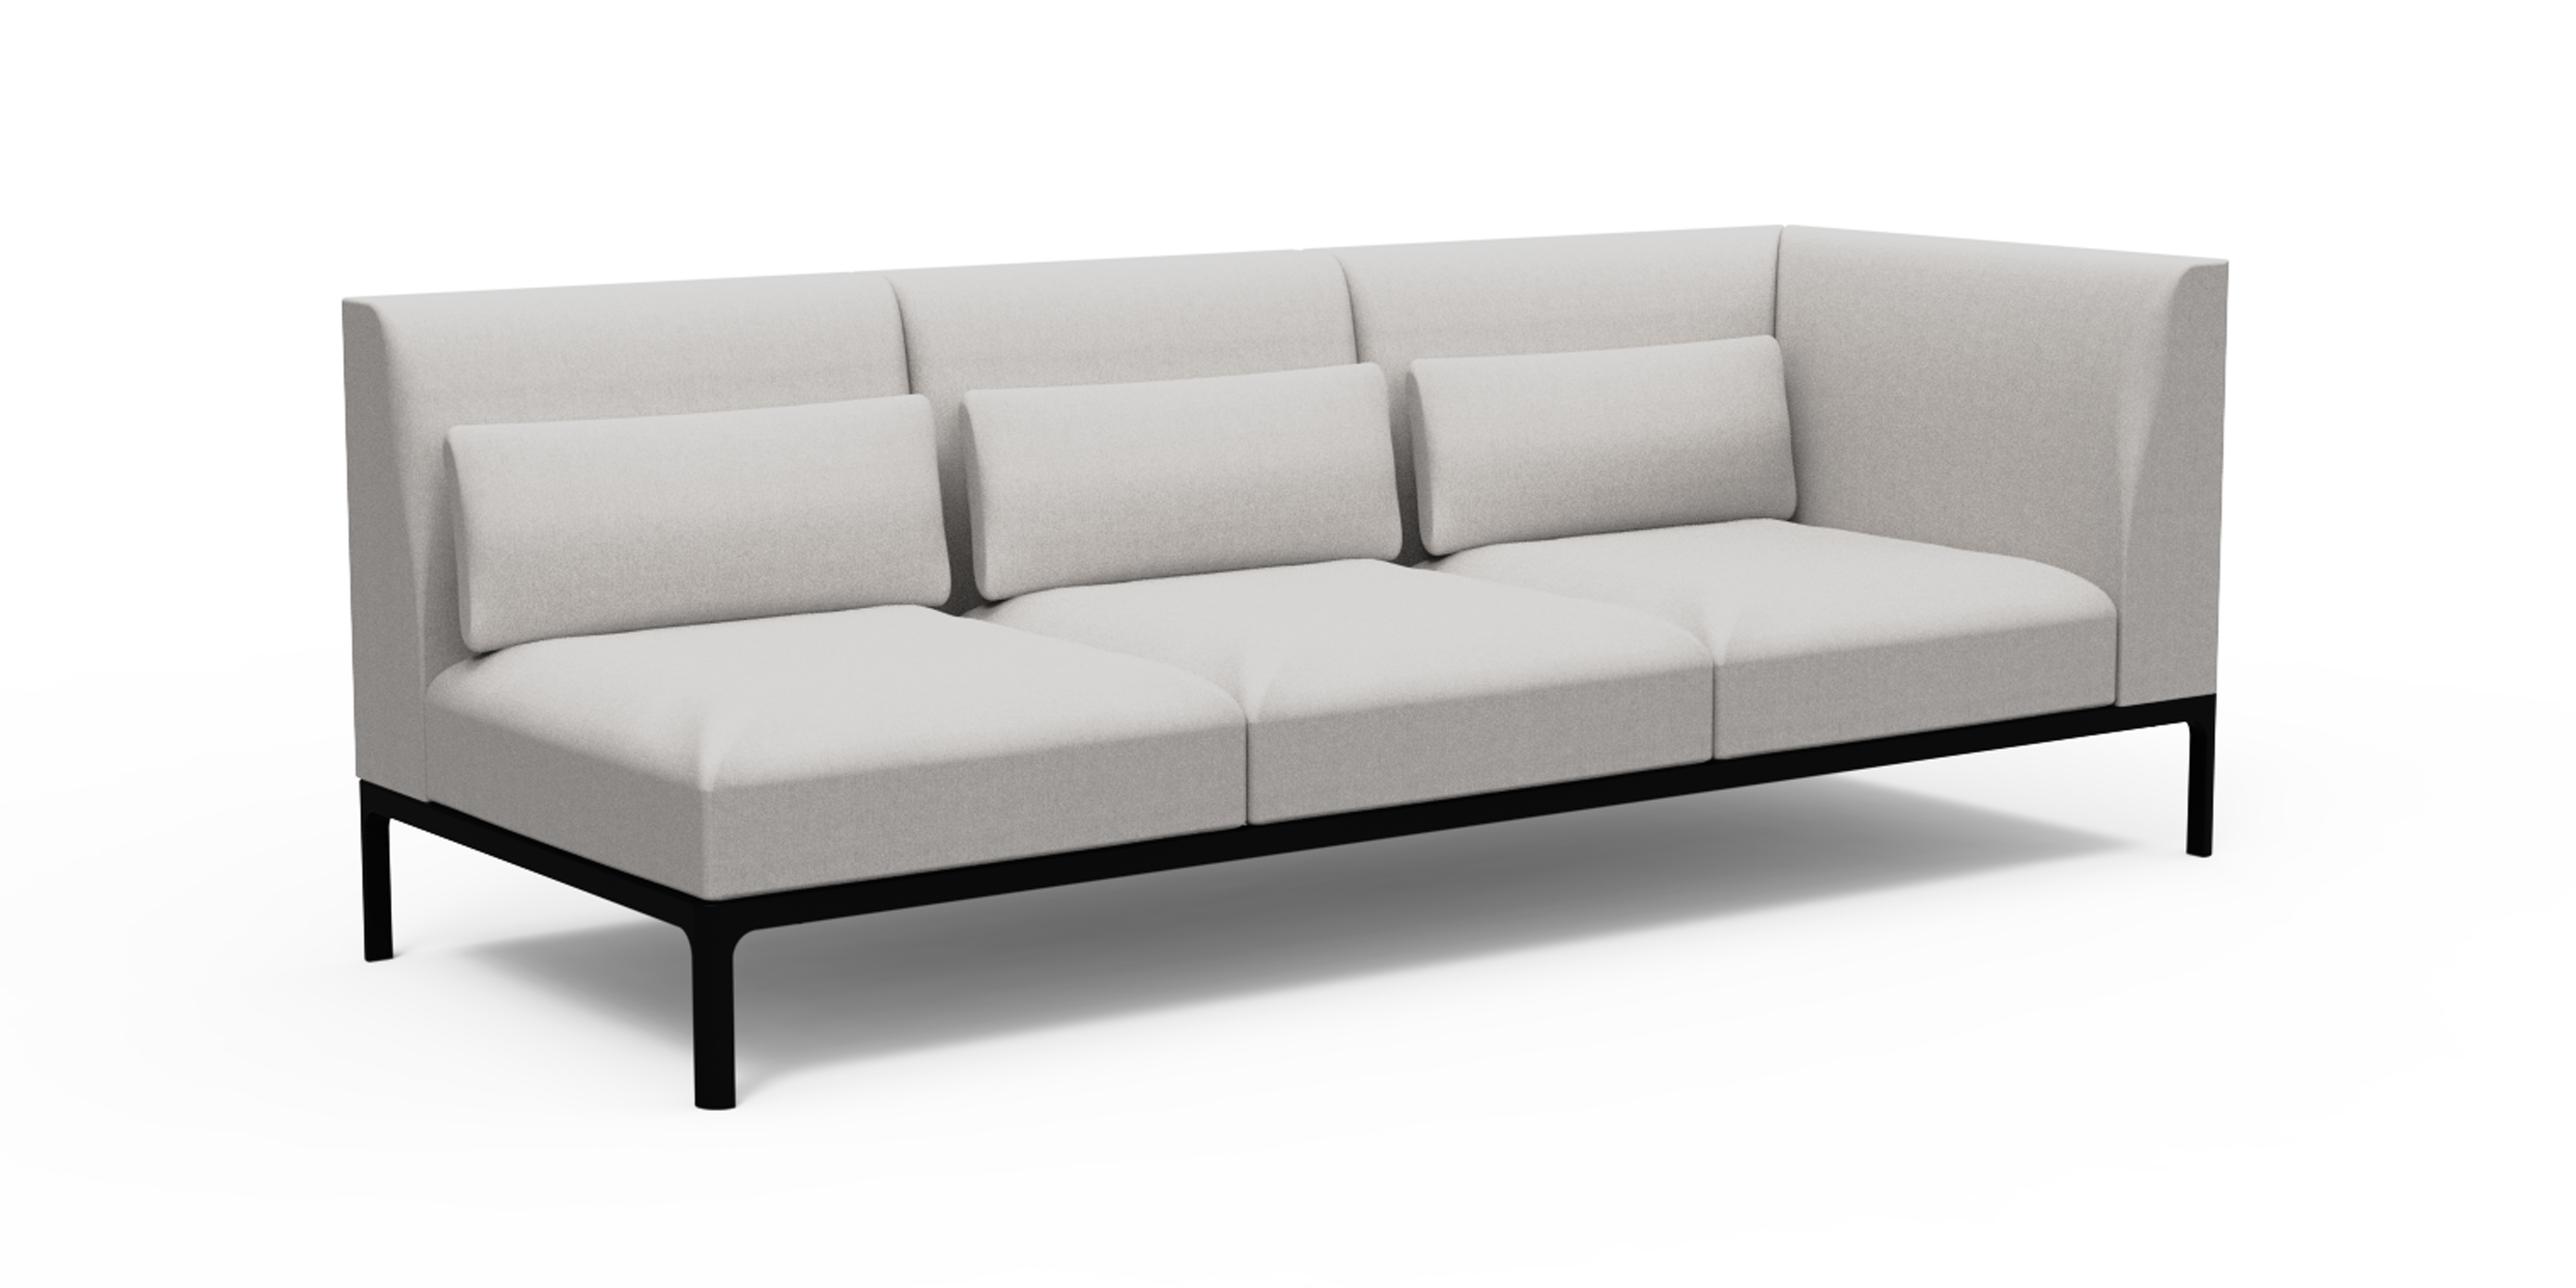 WS - Profile Sofa - 3-seater Chaise right (Light grey)